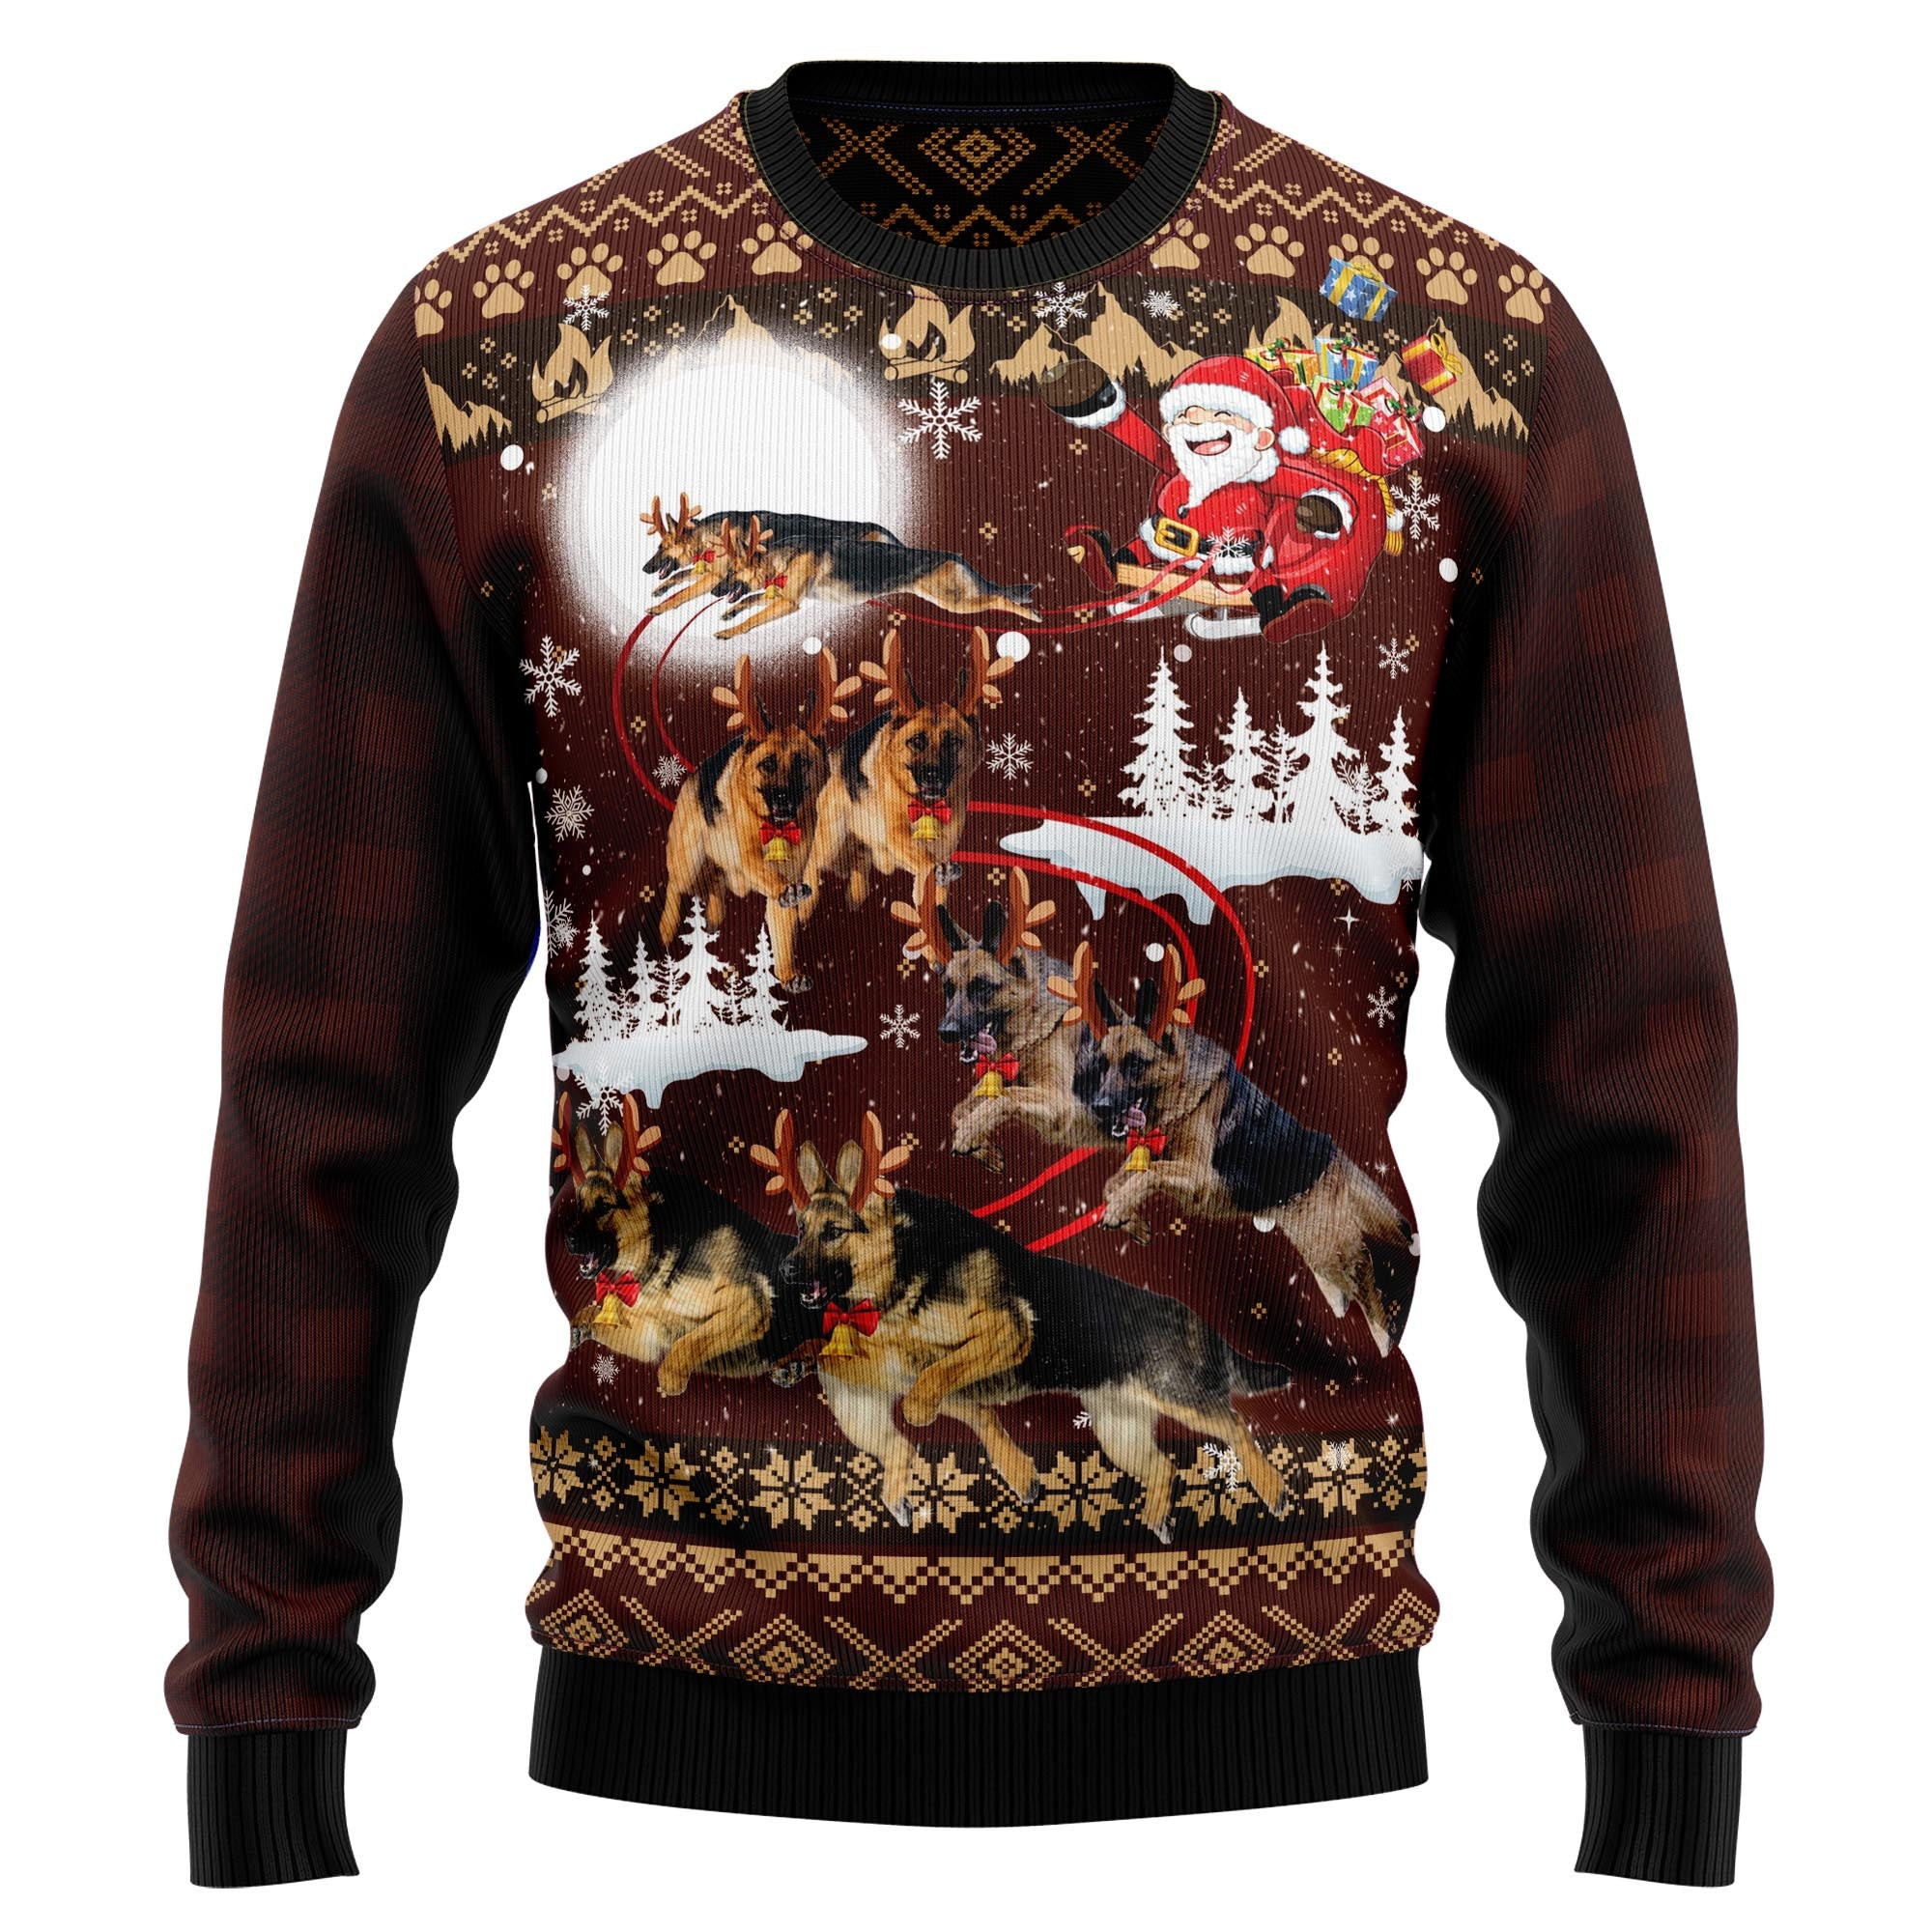 German Shepherd Reindeers Car Ugly Christmas Sweater, Ugly Sweater For Men Women, Holiday Sweater